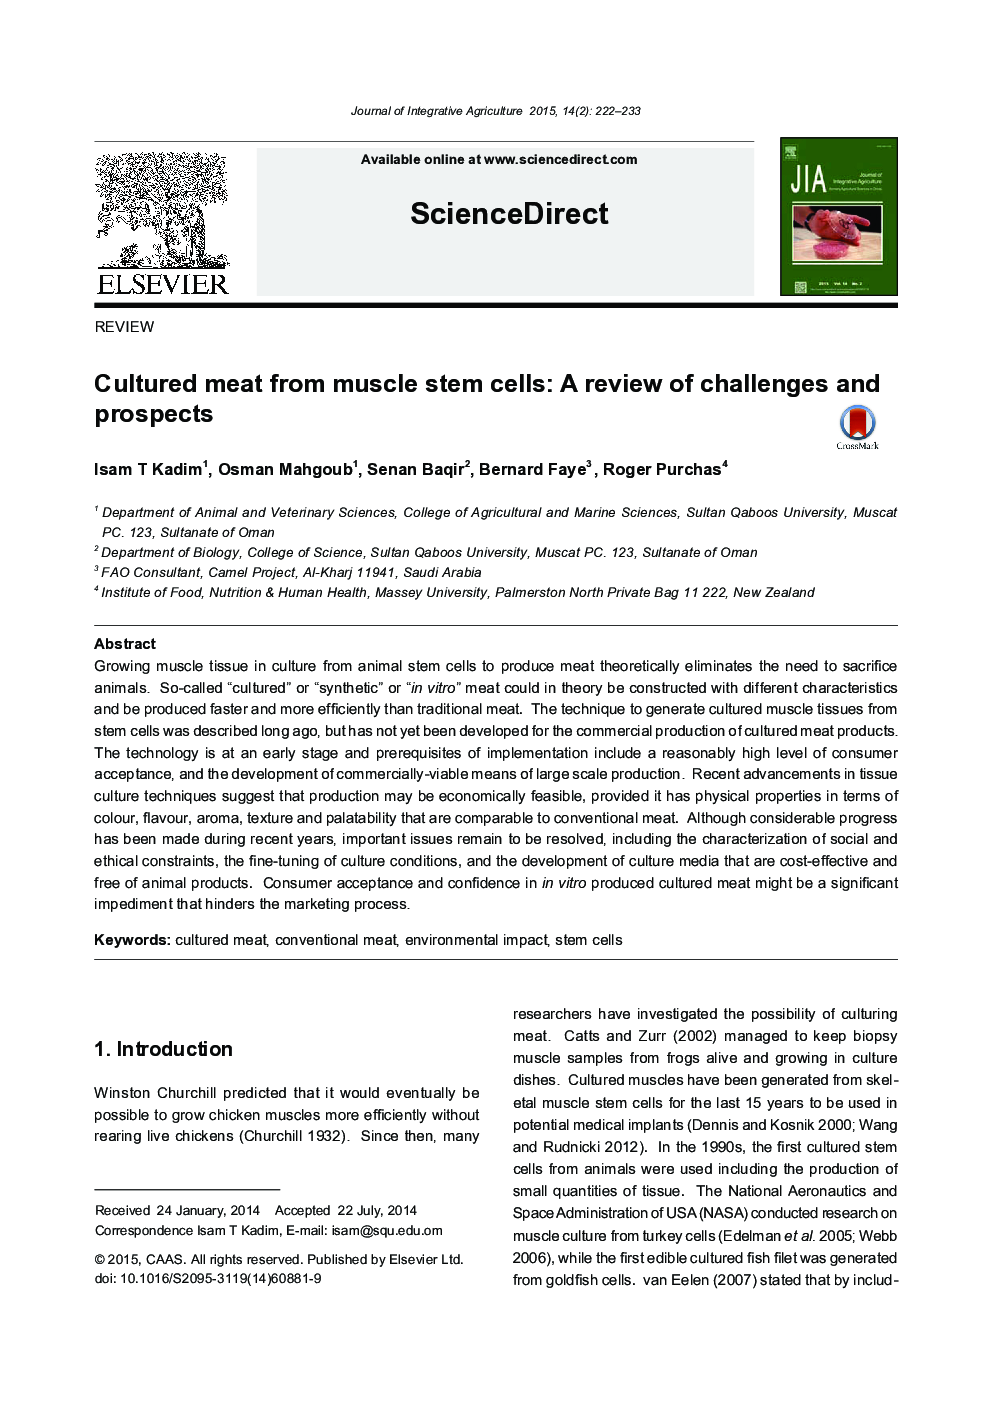 Cultured meat from muscle stem cells: A review of challenges and prospects